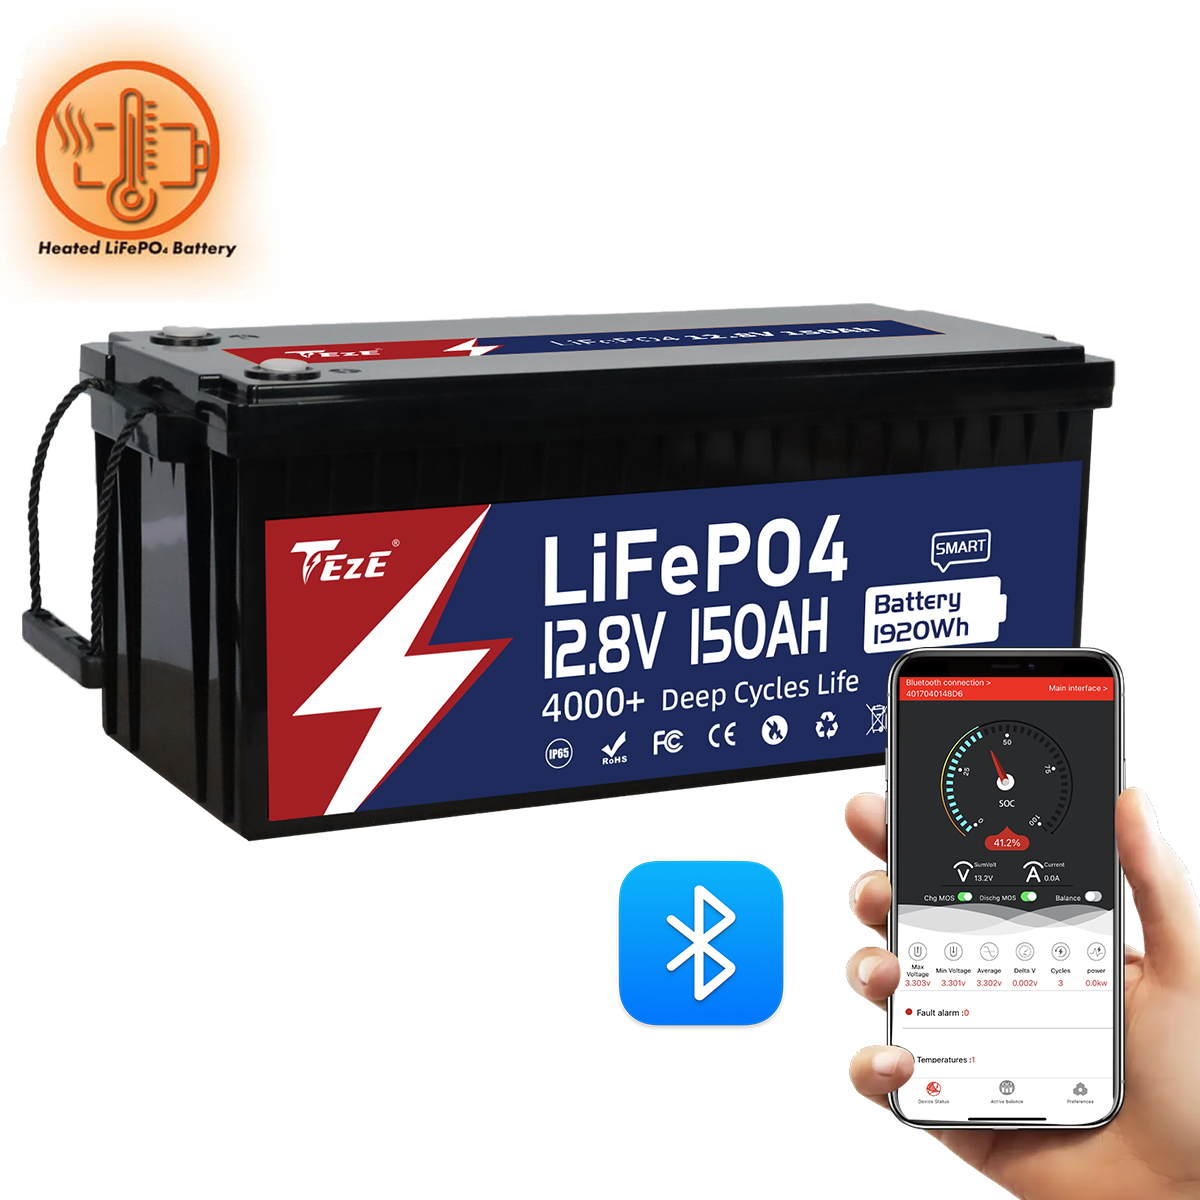 TezePower 12V 150Ah LiFePO4 Battery with Bluetooth, Self-heating and Active Balancer, Built-in 150A Daly BMS(Bluetooth Built-in Version)